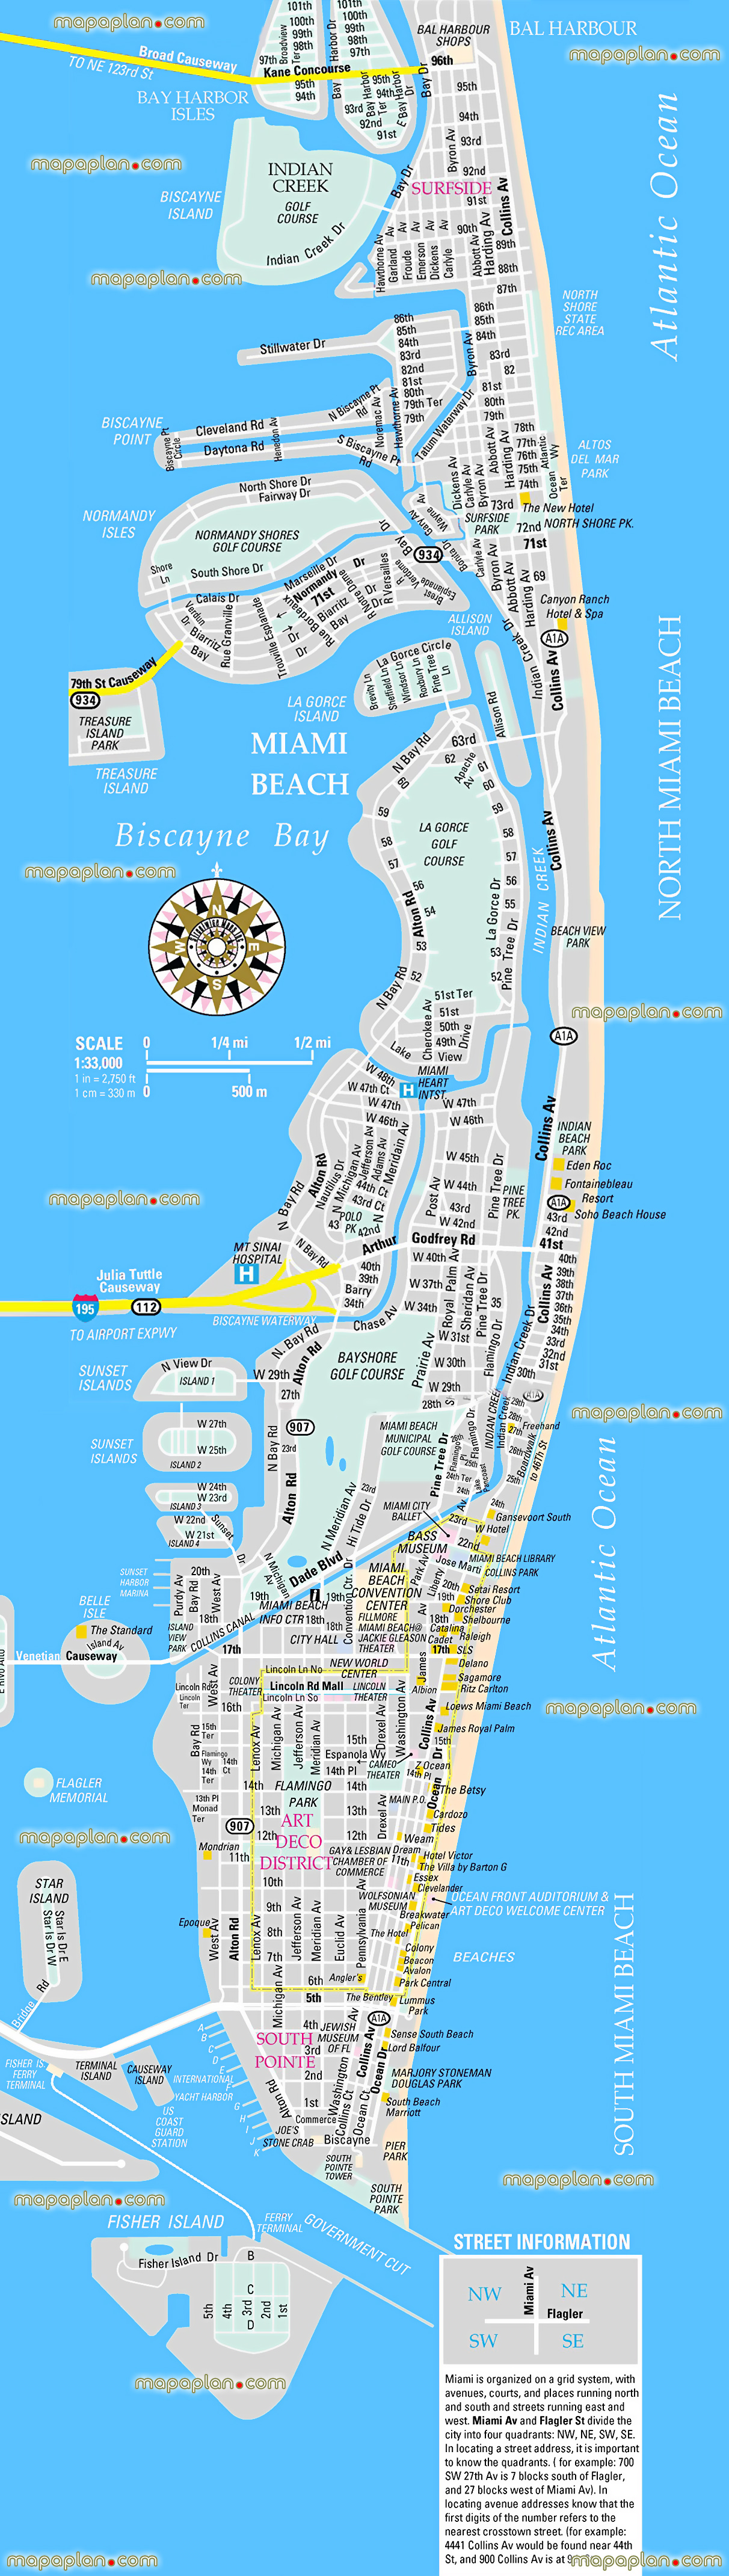 miami south north beach tourist information plan free download interactive espana visitors guide central area tourist turistico information offline downloadable virtual interactive hd plan overview trip highlights